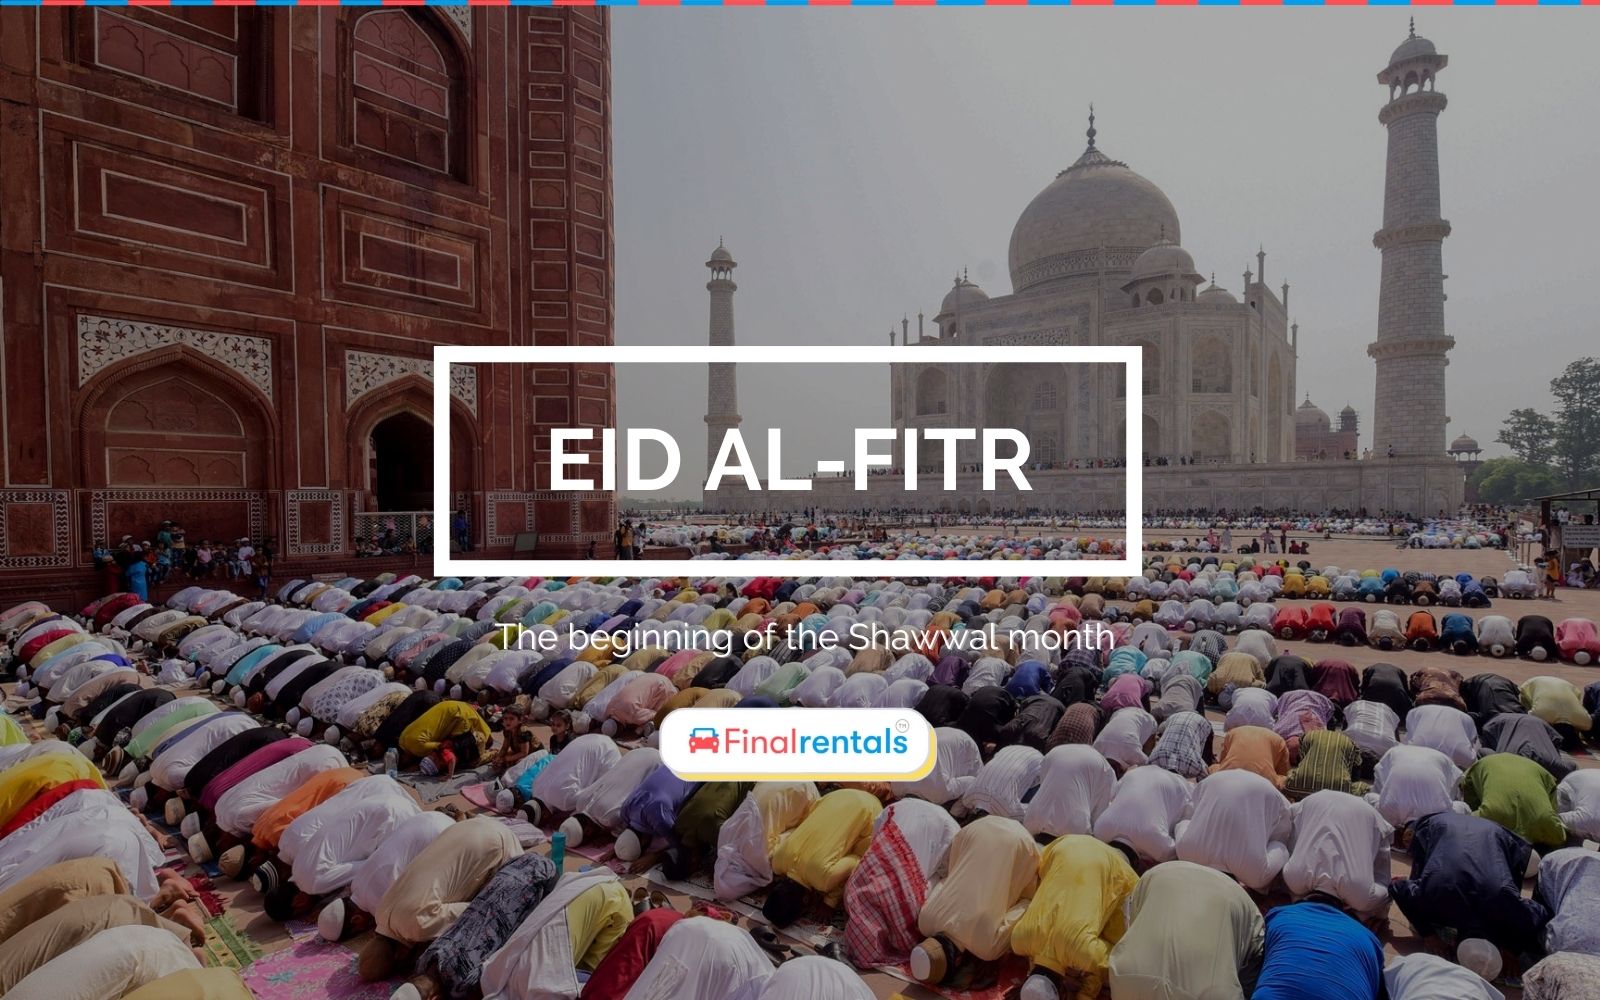 Eid al-Fitr: The Muslim Holiday of Breaking the Fast